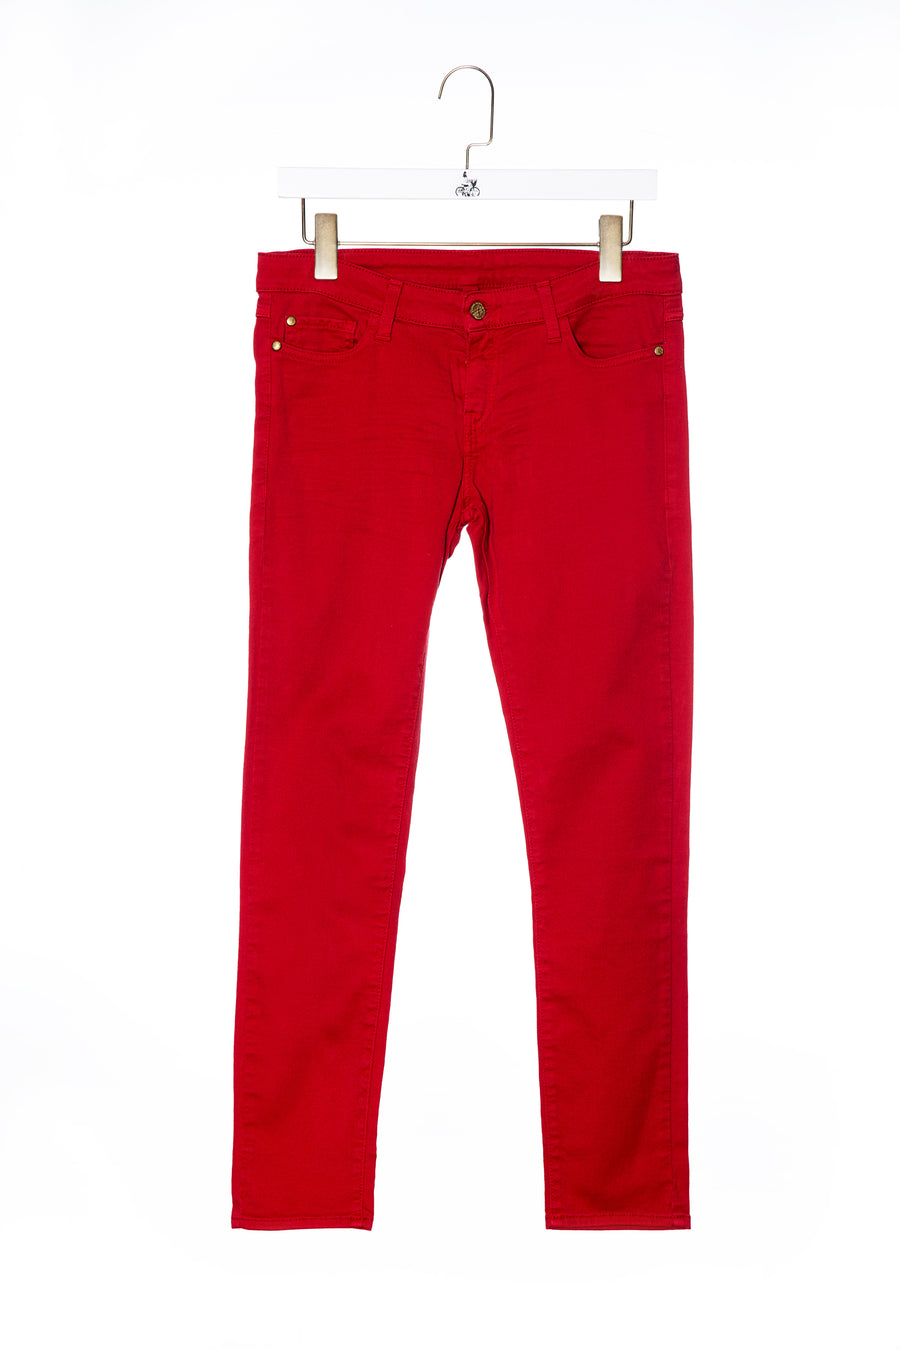 Pants Scard Red